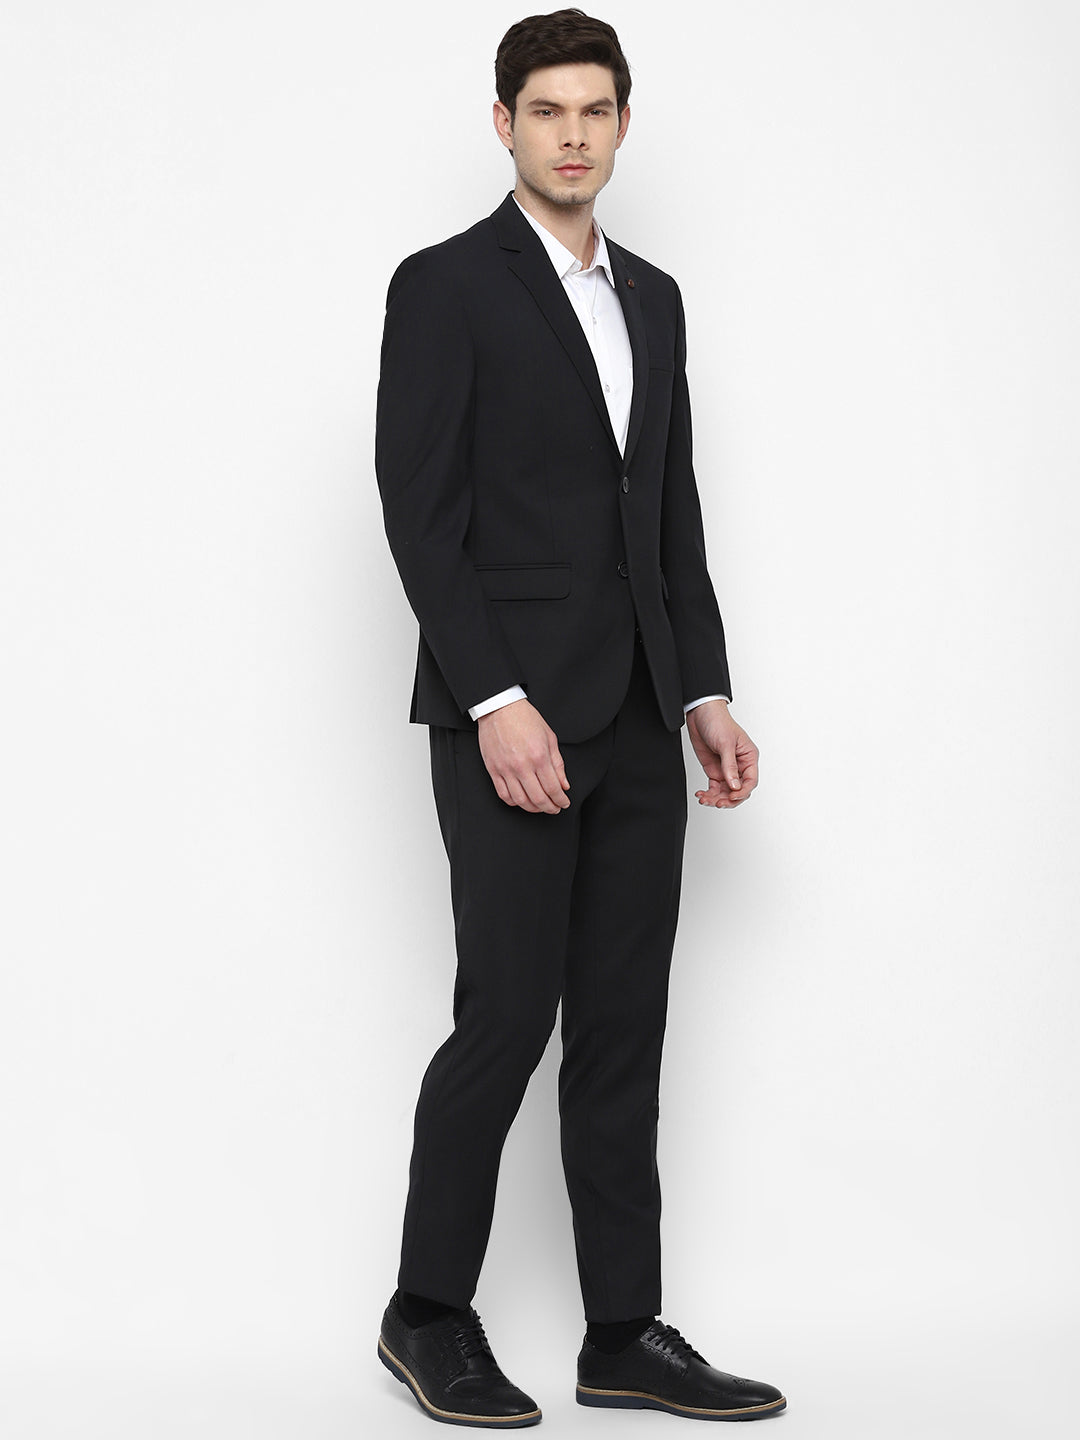 Black Tie Attire for Men: Special Event & Wedding Outfits | The Black Tux  Blog